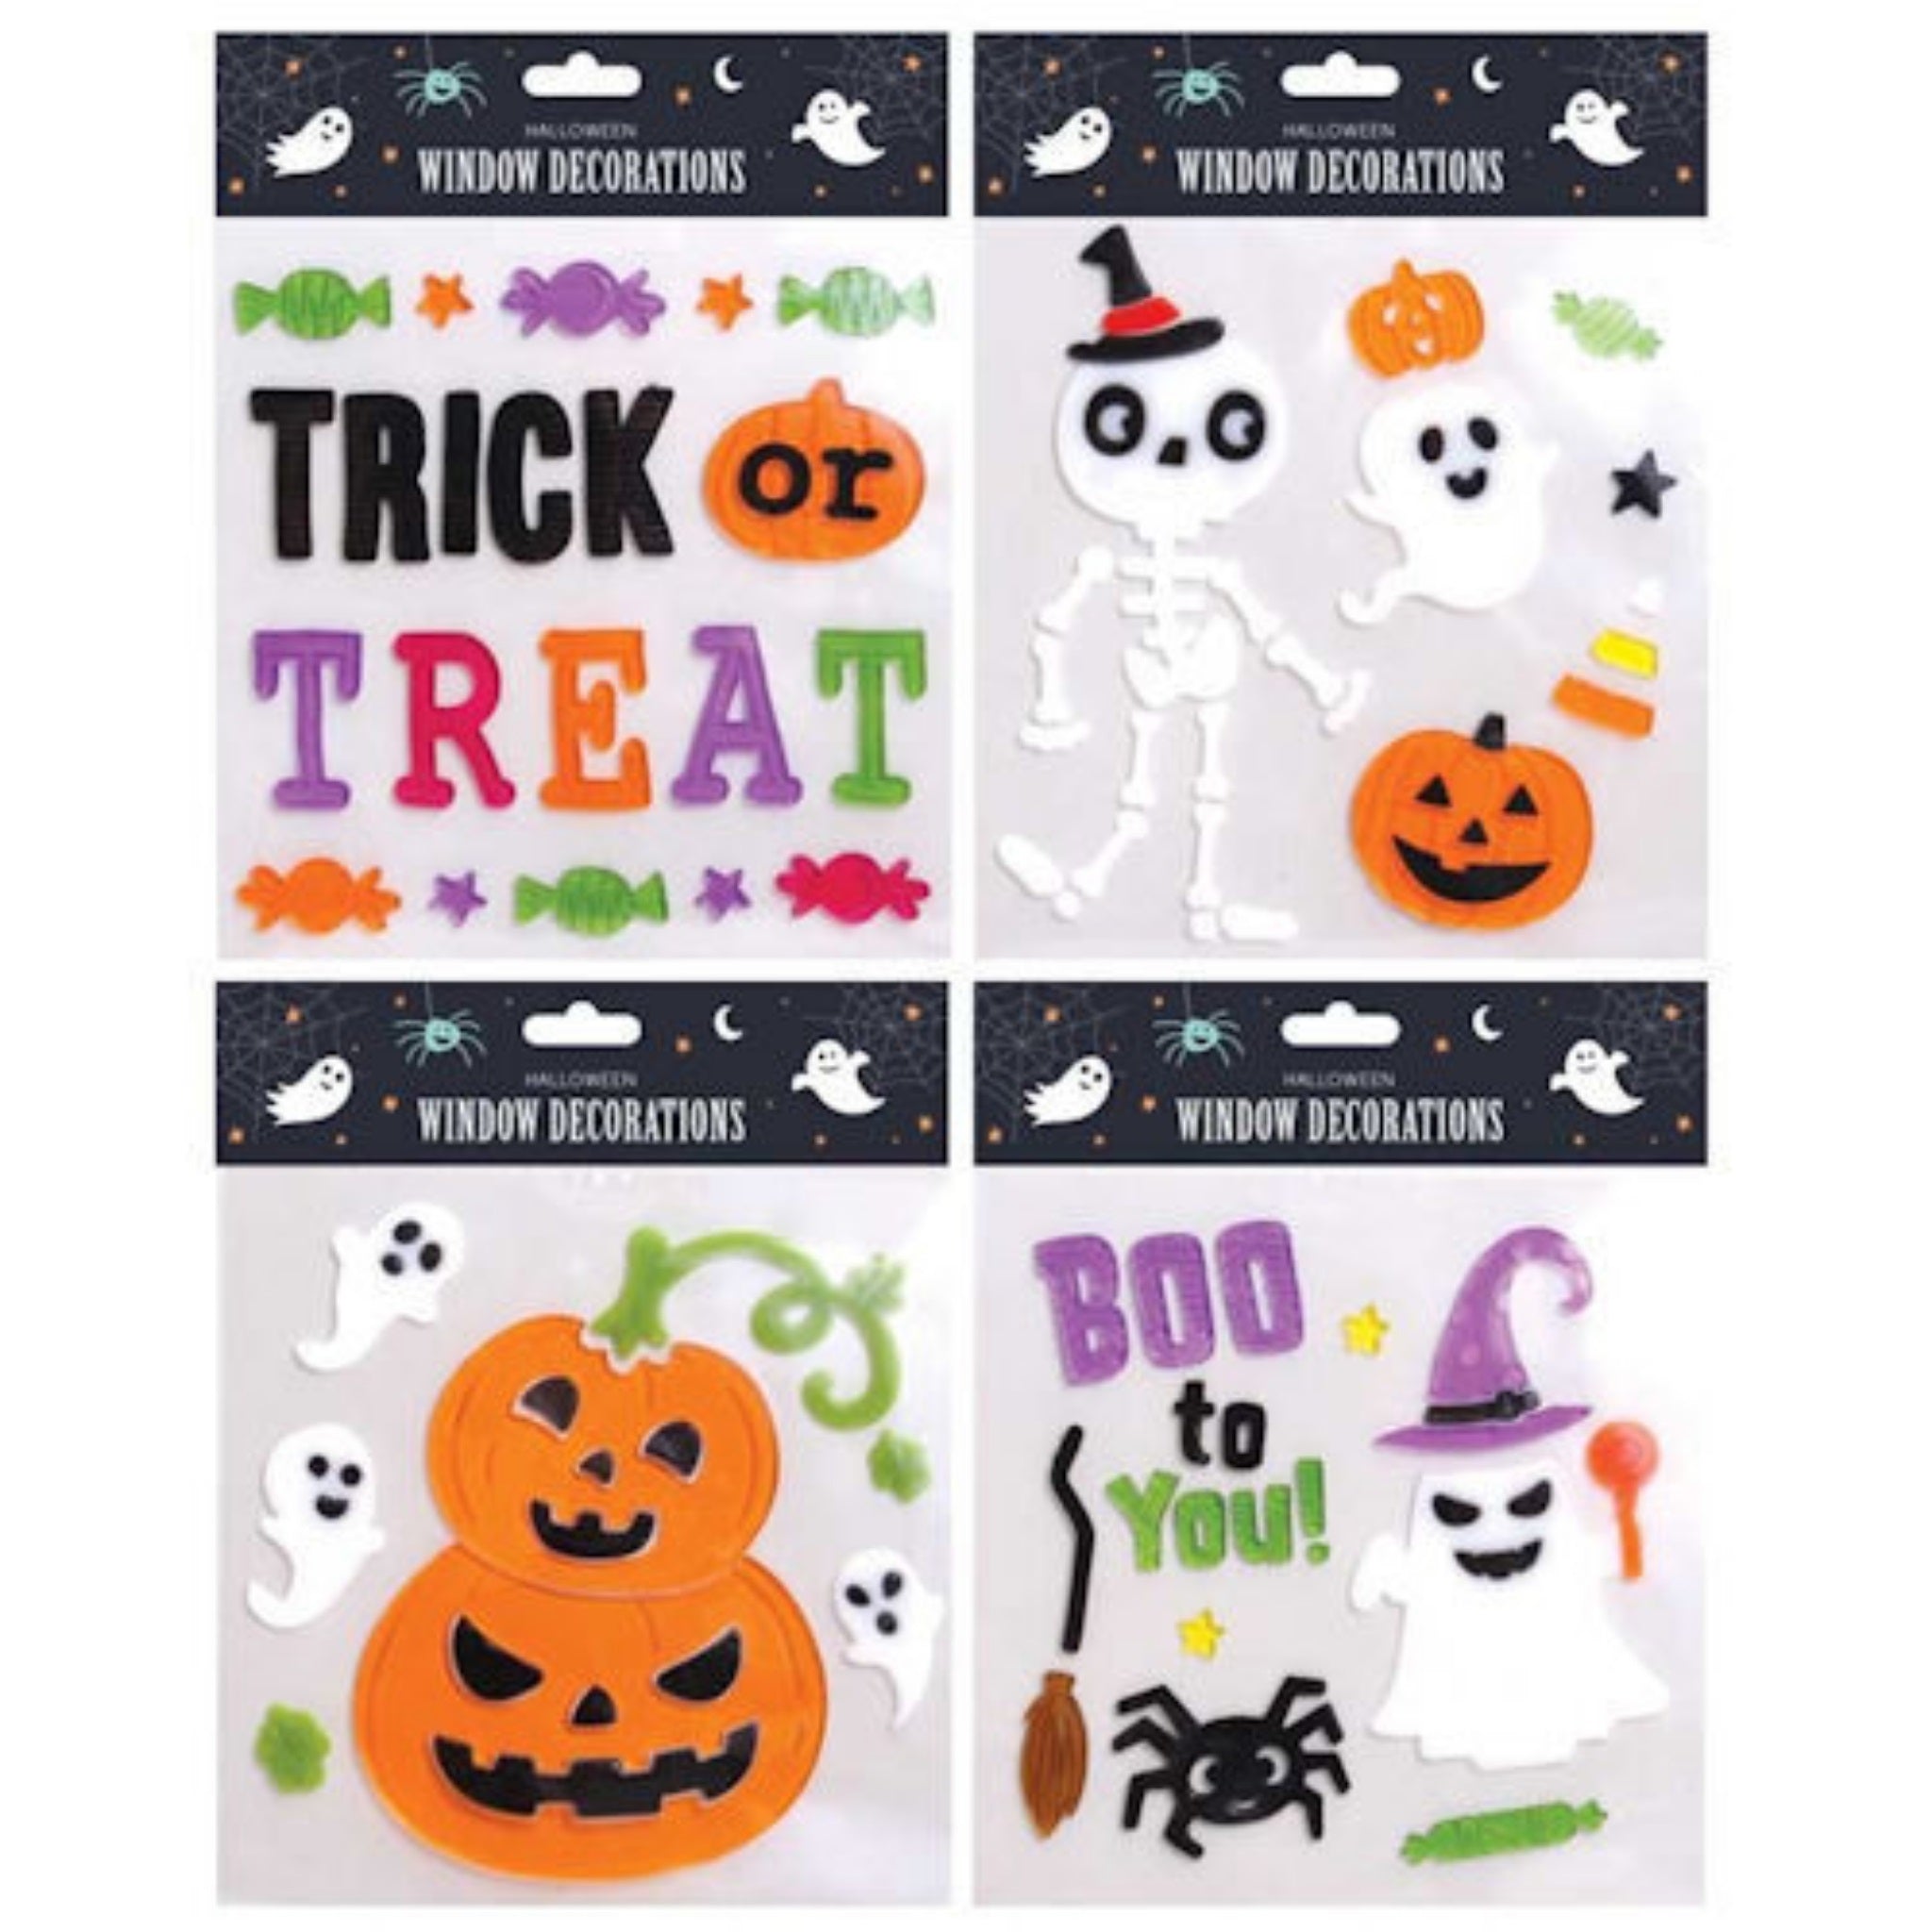 Beclen Harp Halloween Character Gel Clings Window Stickers Decoration/ Assorted Boo To You Trick To Treat Spooky Scary House Party Decorations